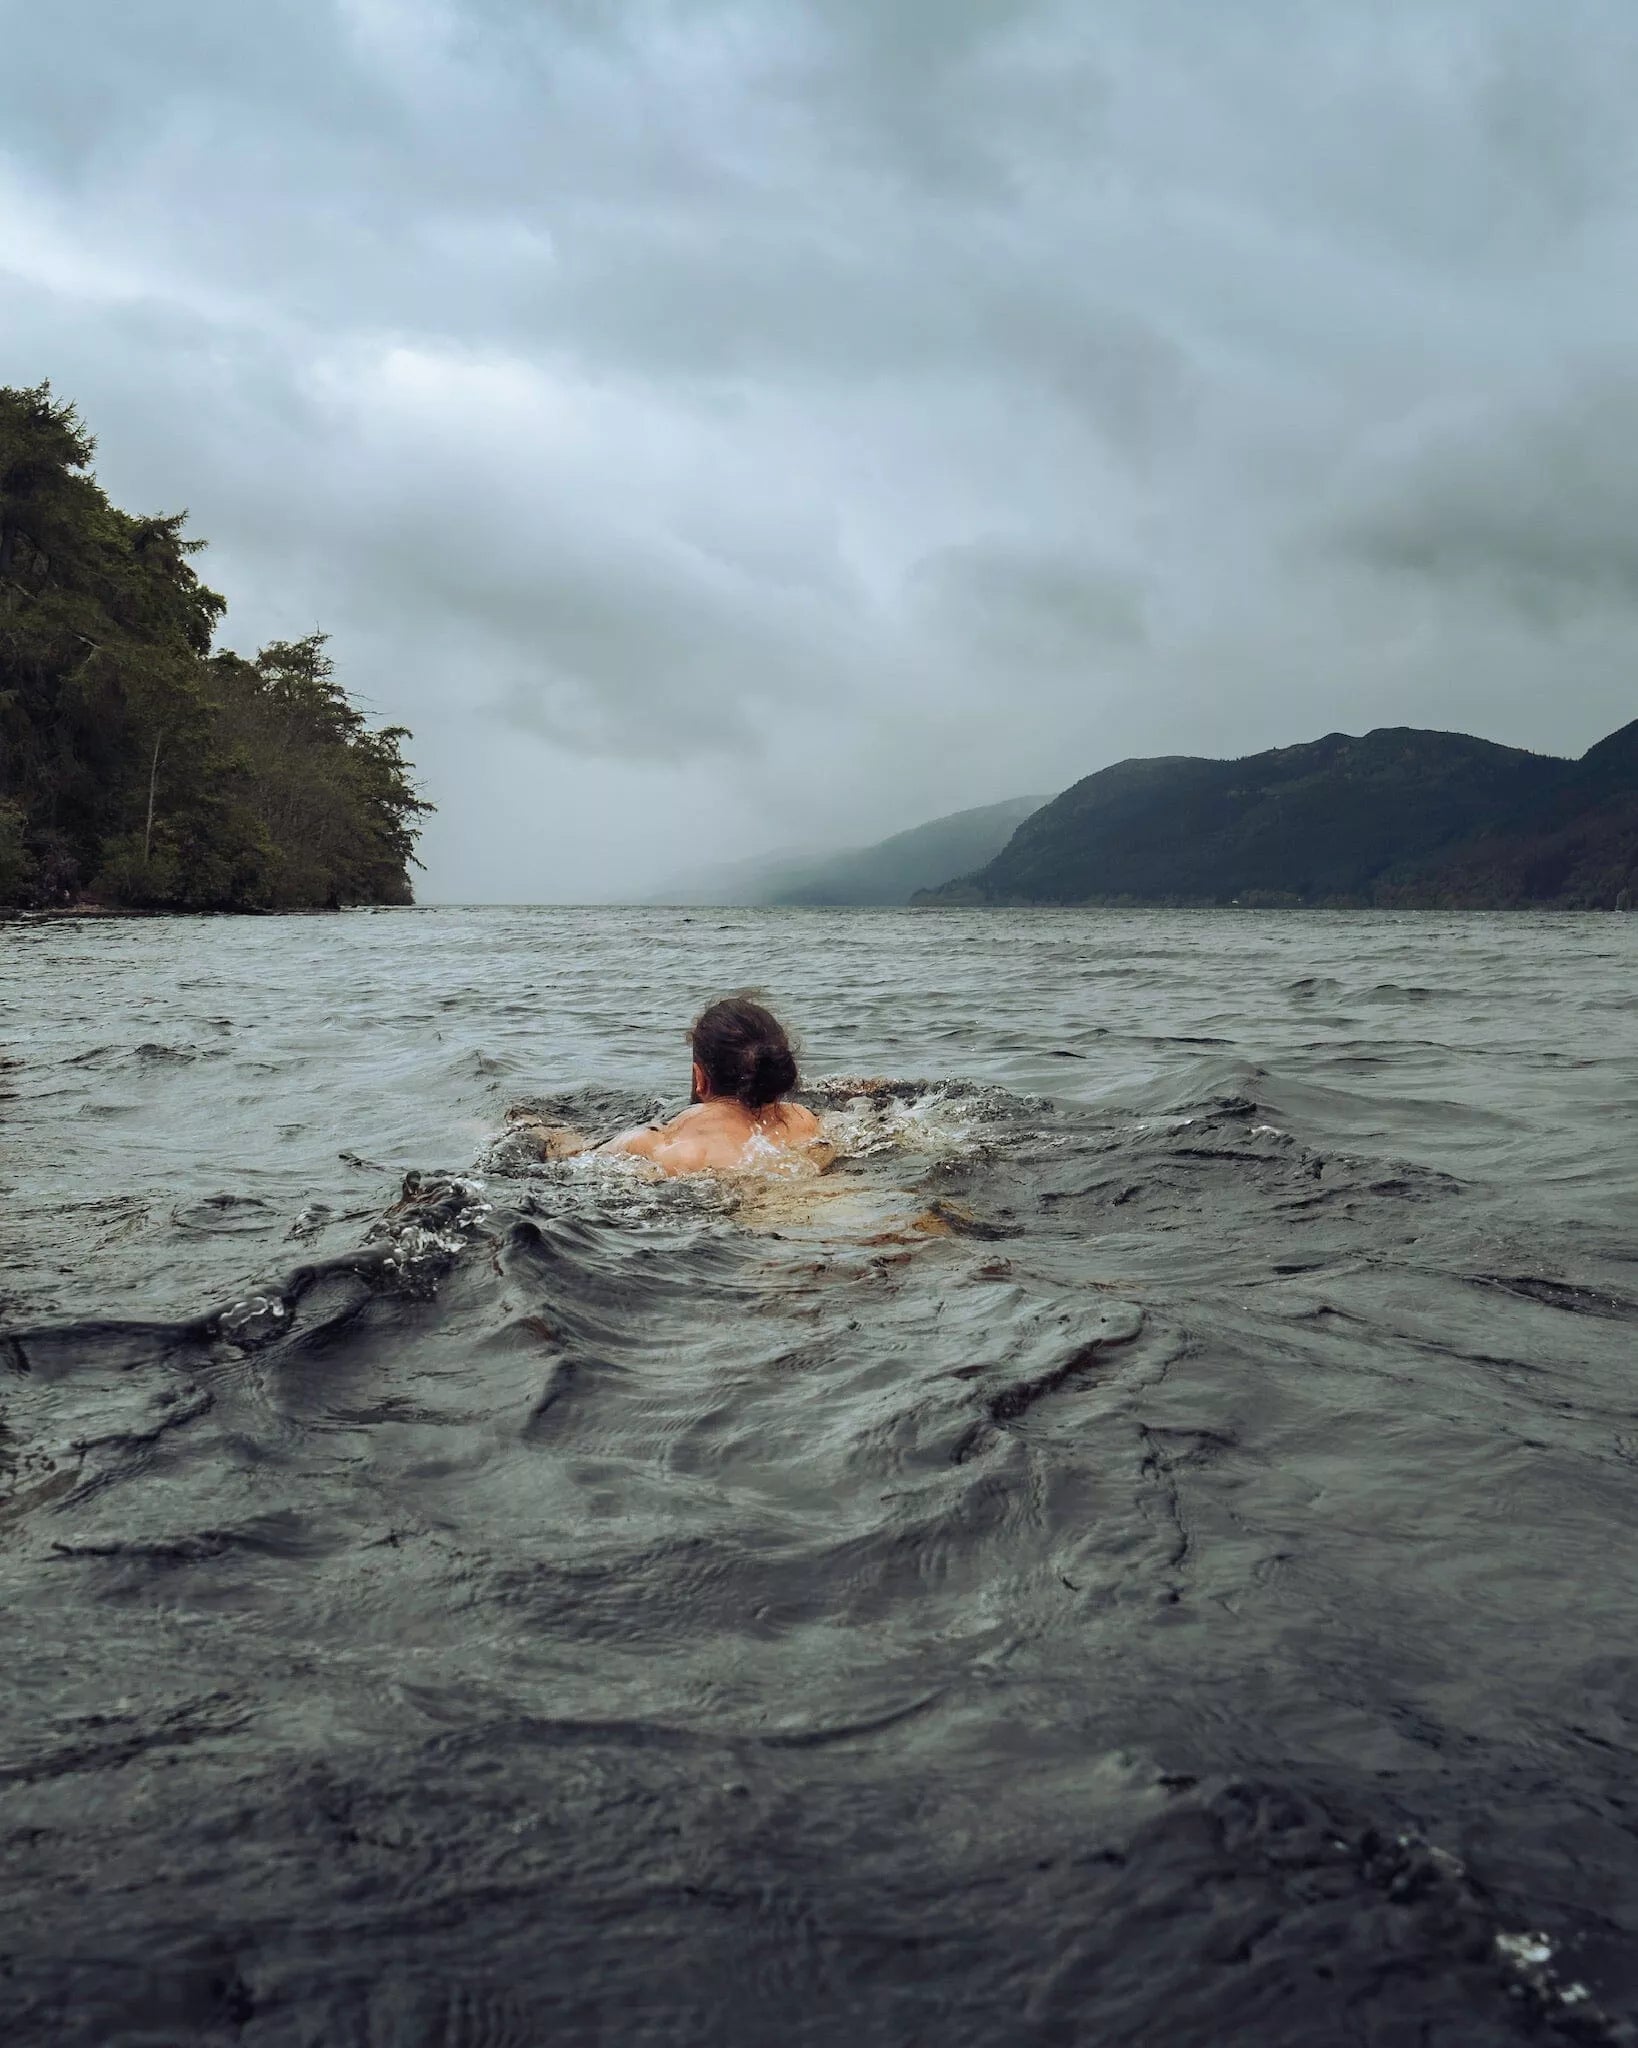 Why is Wild Swimming becoming so popular?